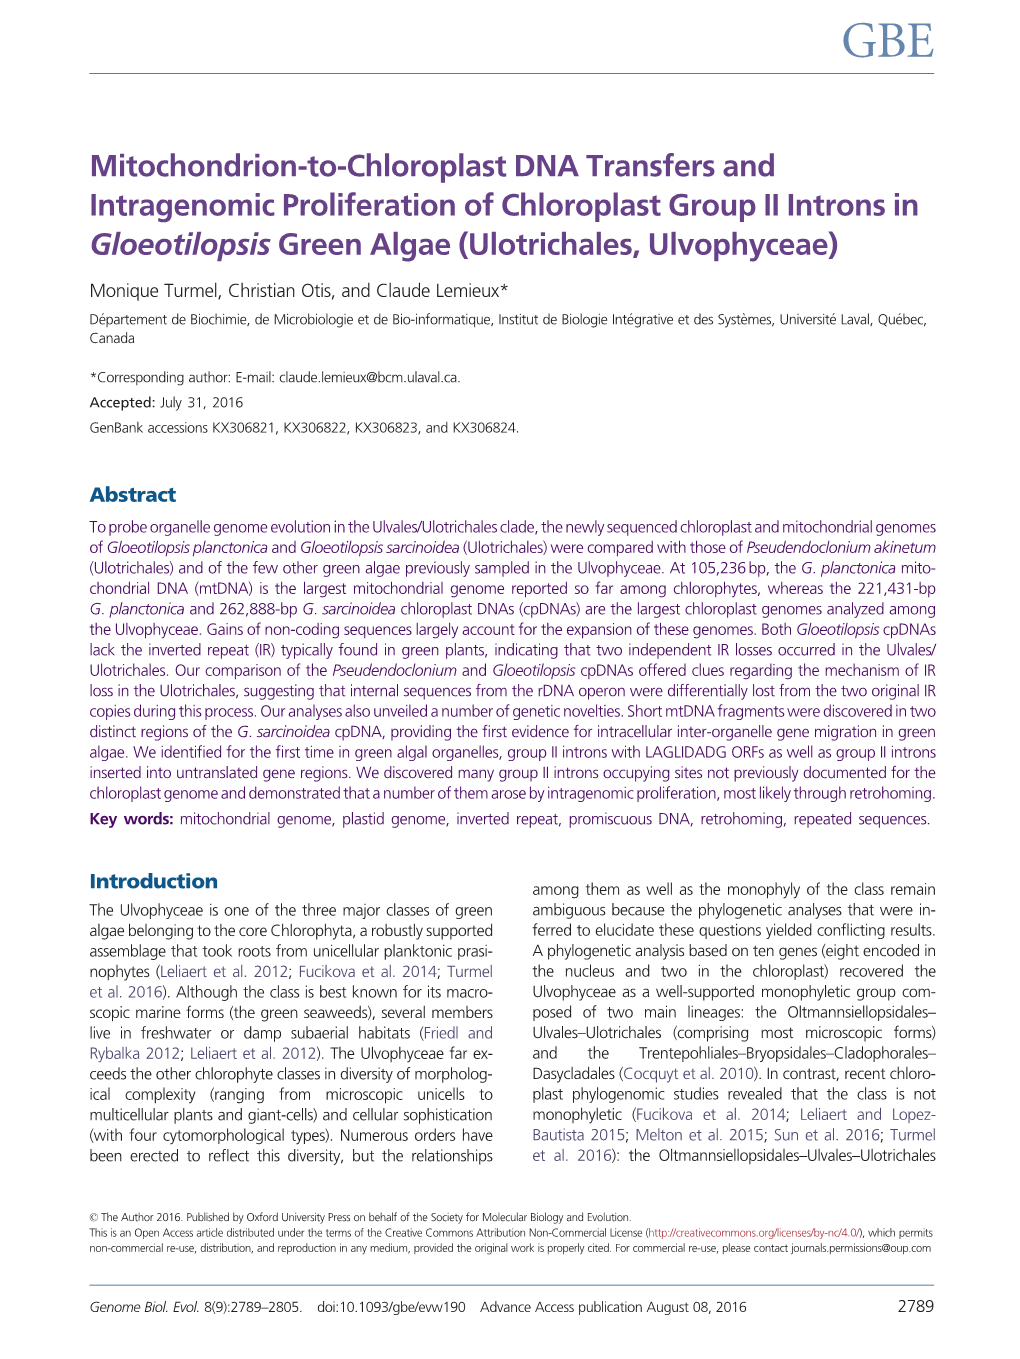 Mitochondrion-To-Chloroplast DNA Transfers and Intragenomic Proliferation of Chloroplast Group II Introns in Gloeotilopsis Green Algae (Ulotrichales, Ulvophyceae)